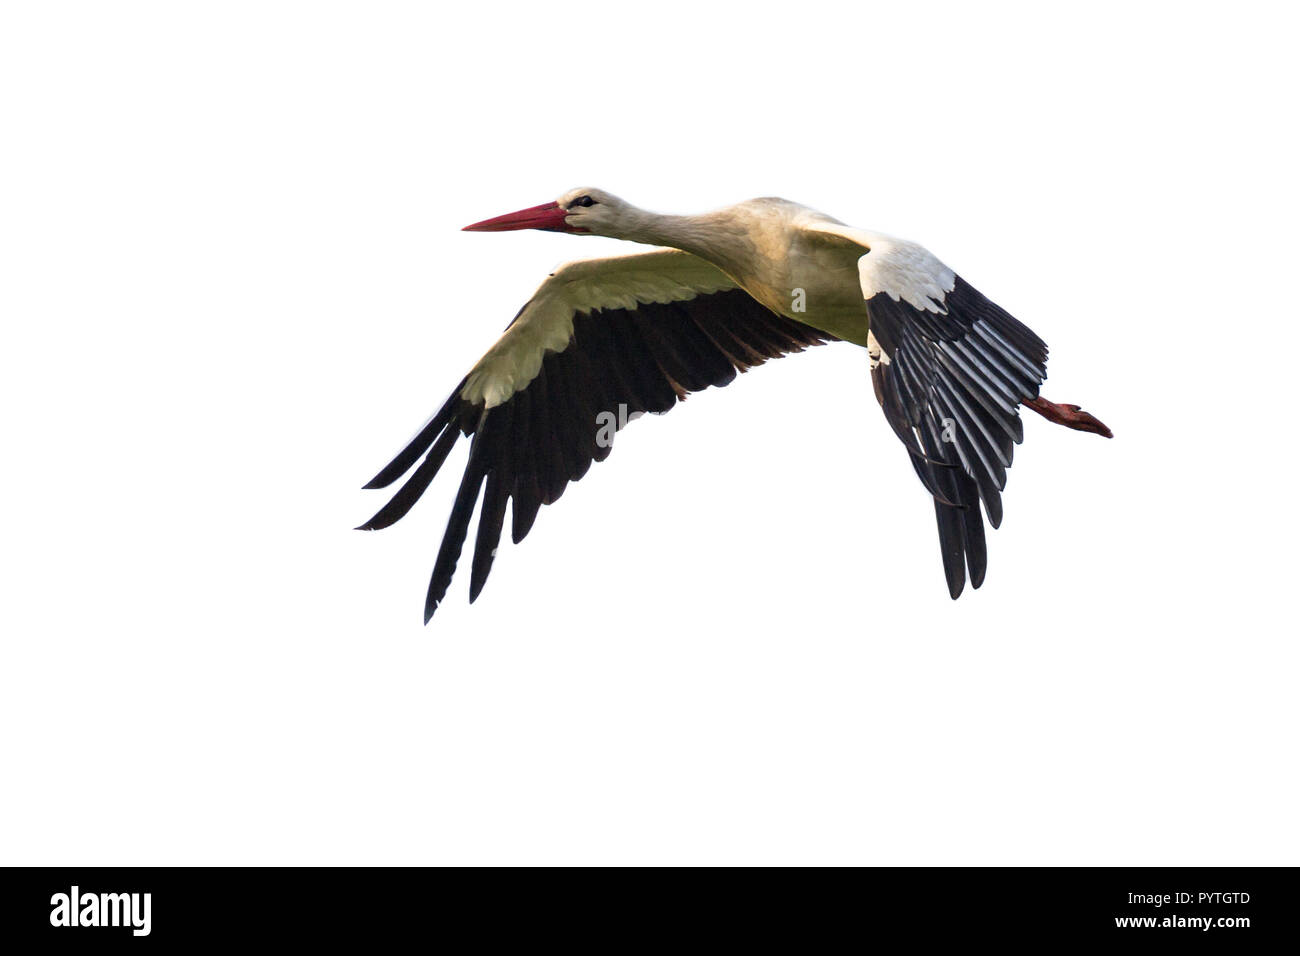 Flying Stork (Ciconia ciconia) on white background Stock Photo